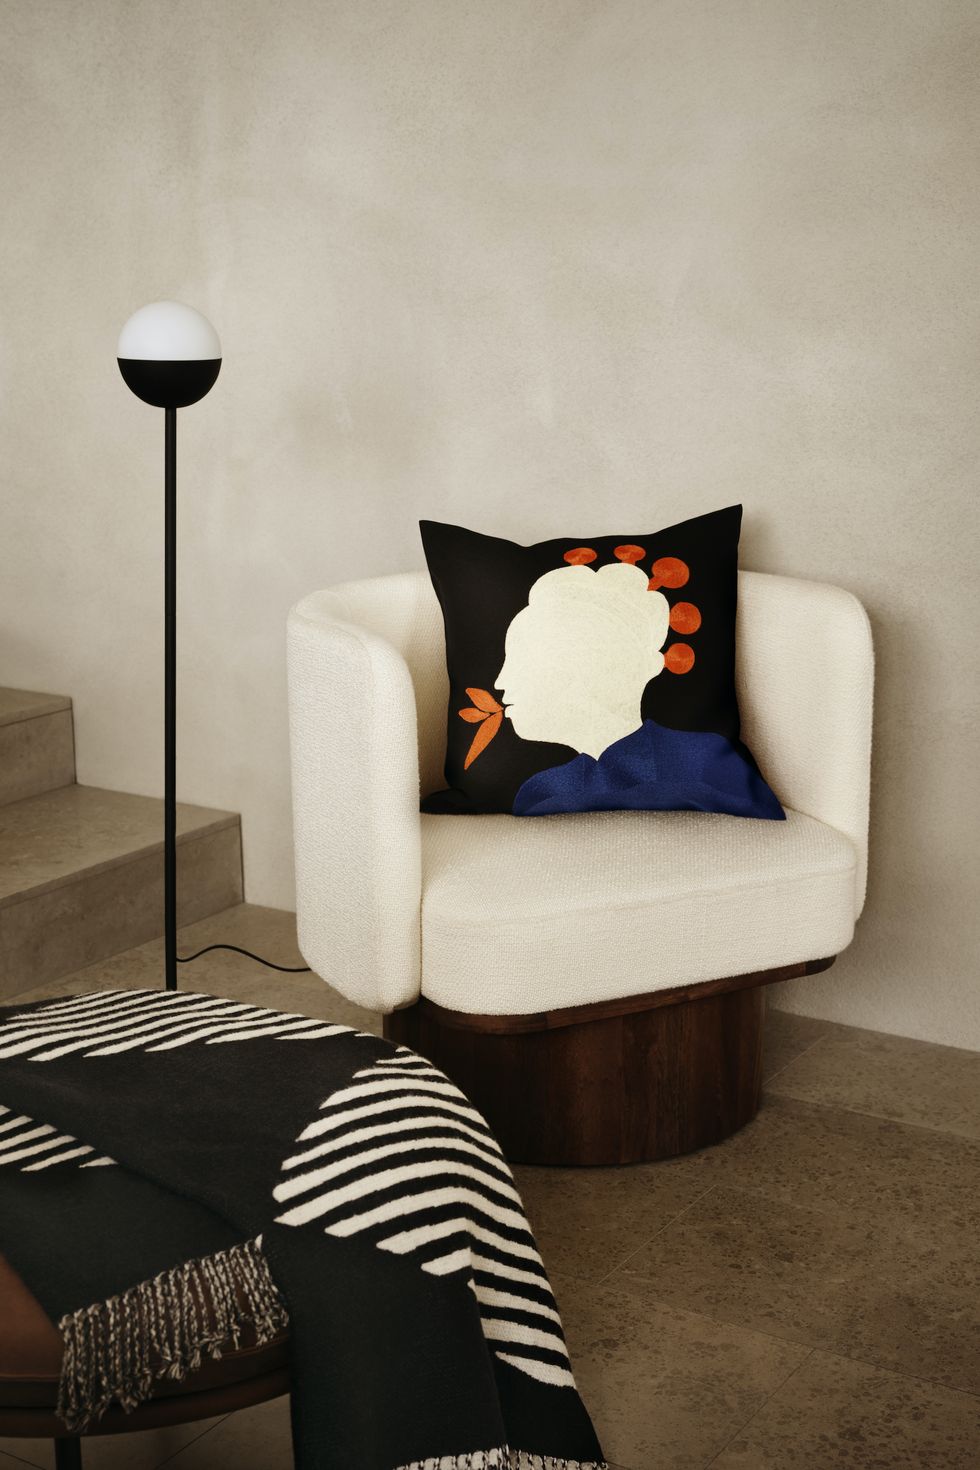 H&M Home For the Love of Art Collection